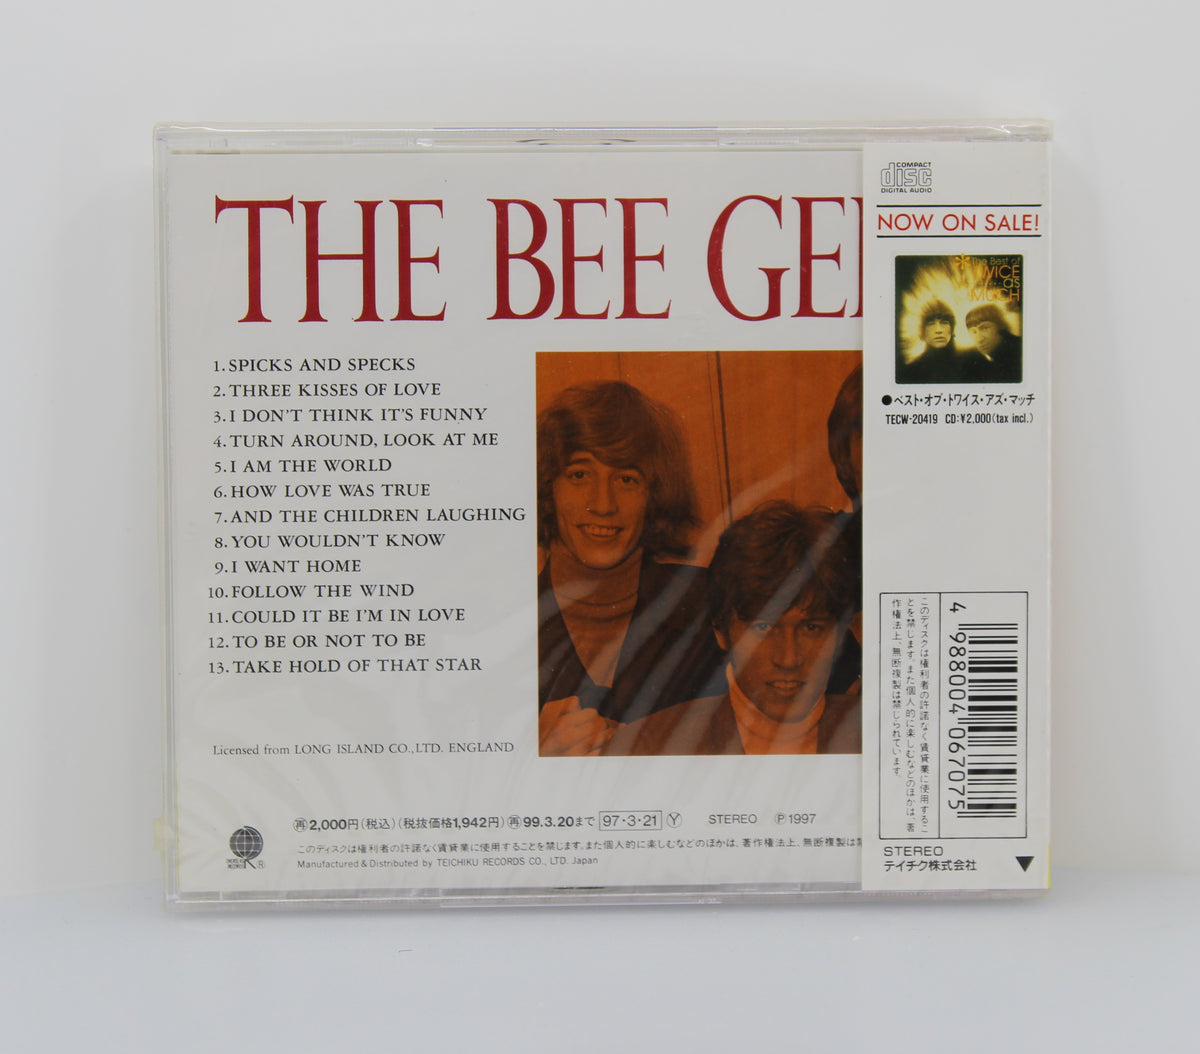 Bee Gees – Anthology 1963-1966, CD, Compilation, Japan 1997